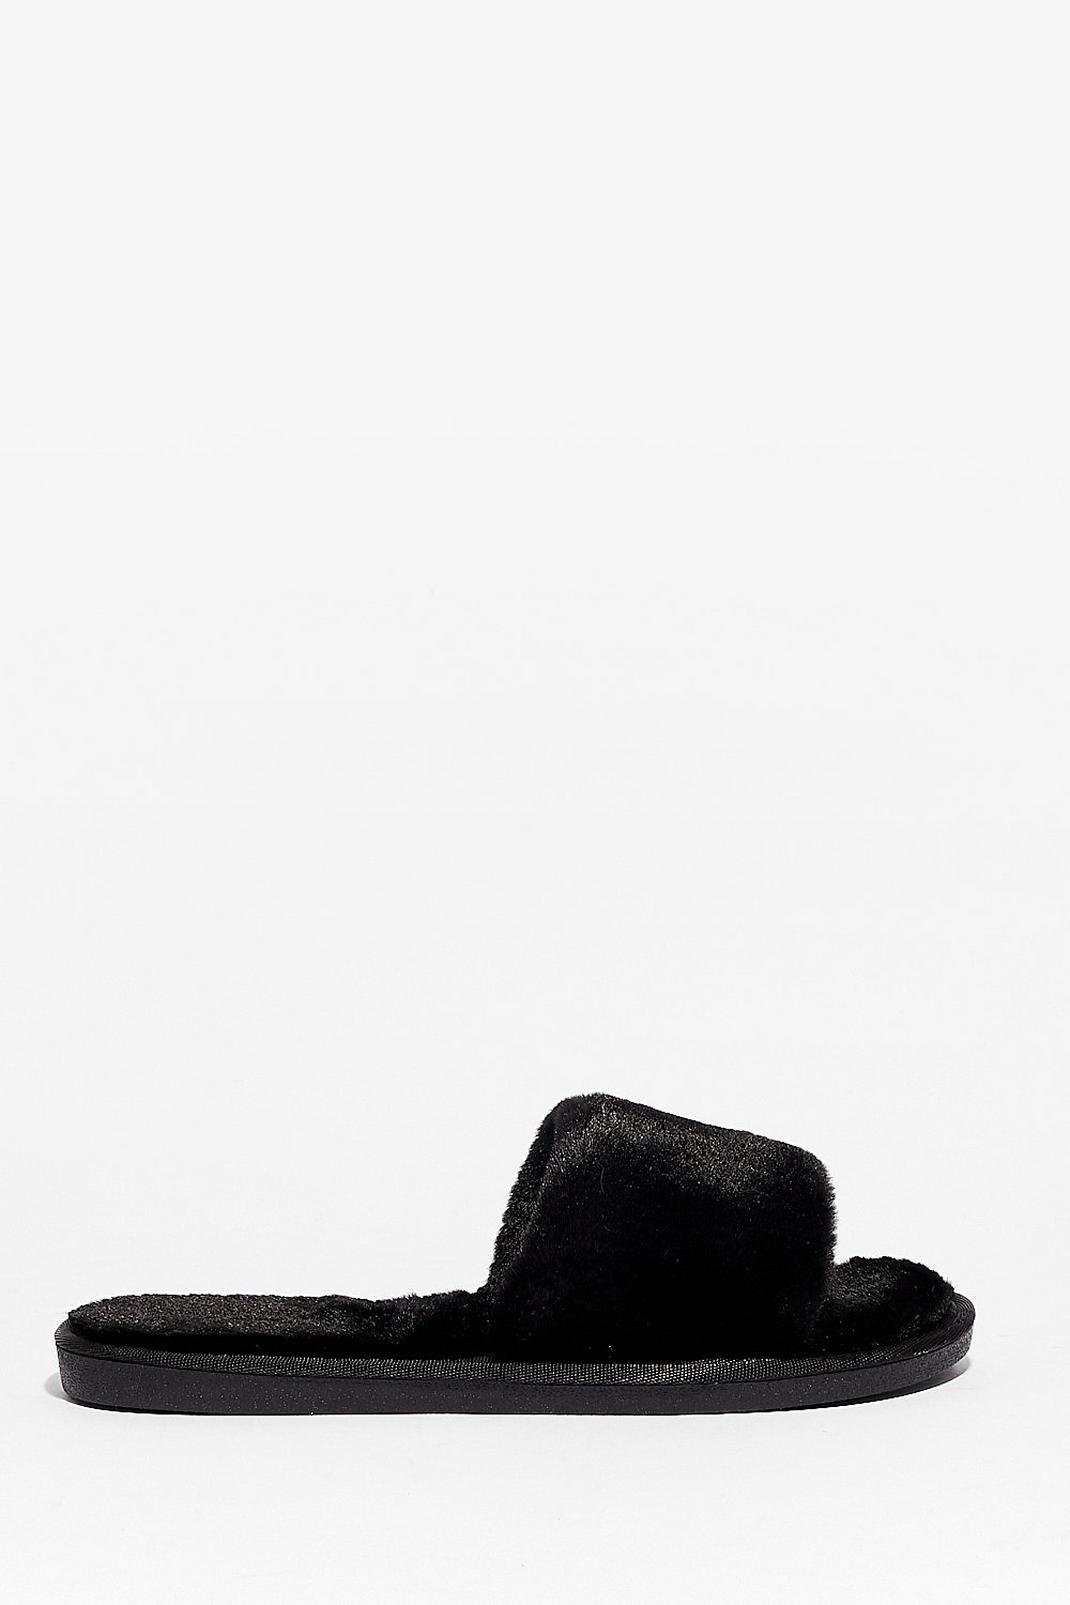 Black Faux Fur Open Toe Slippers image number 1